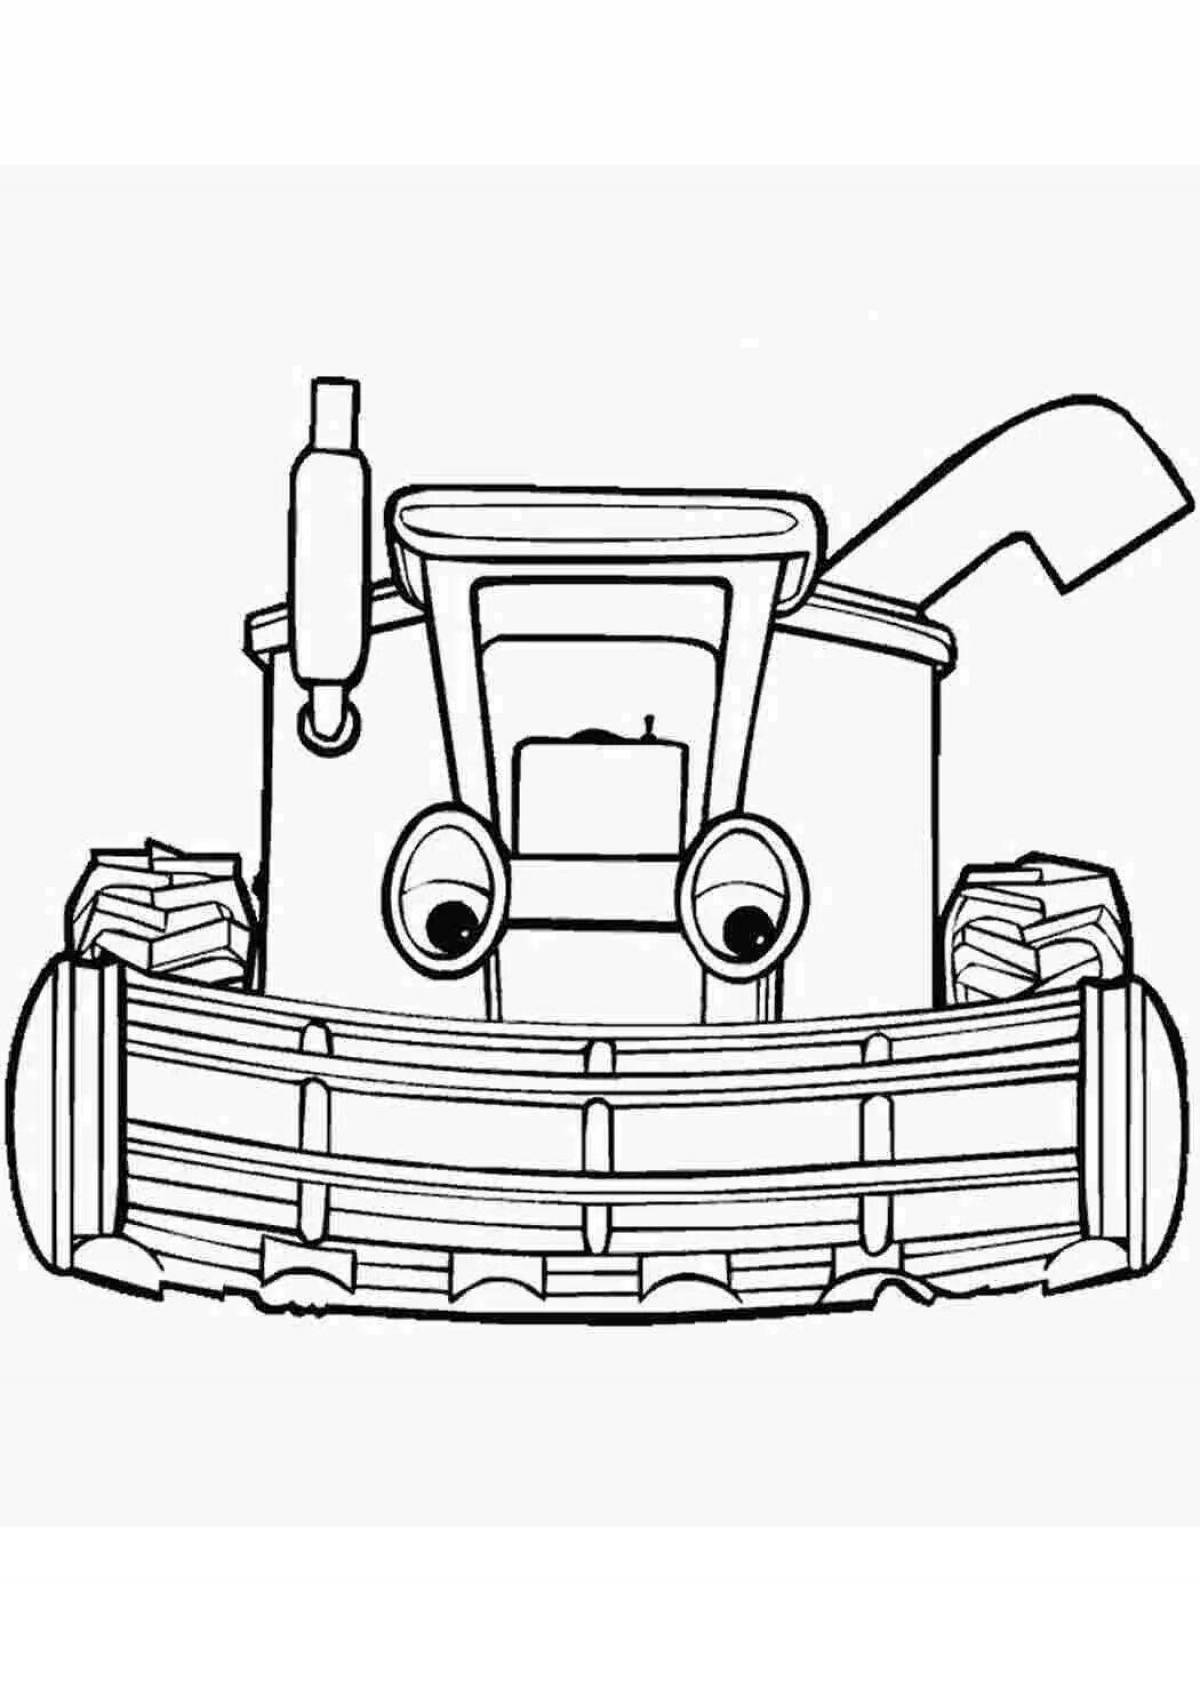 Frank's amazing cars coloring page